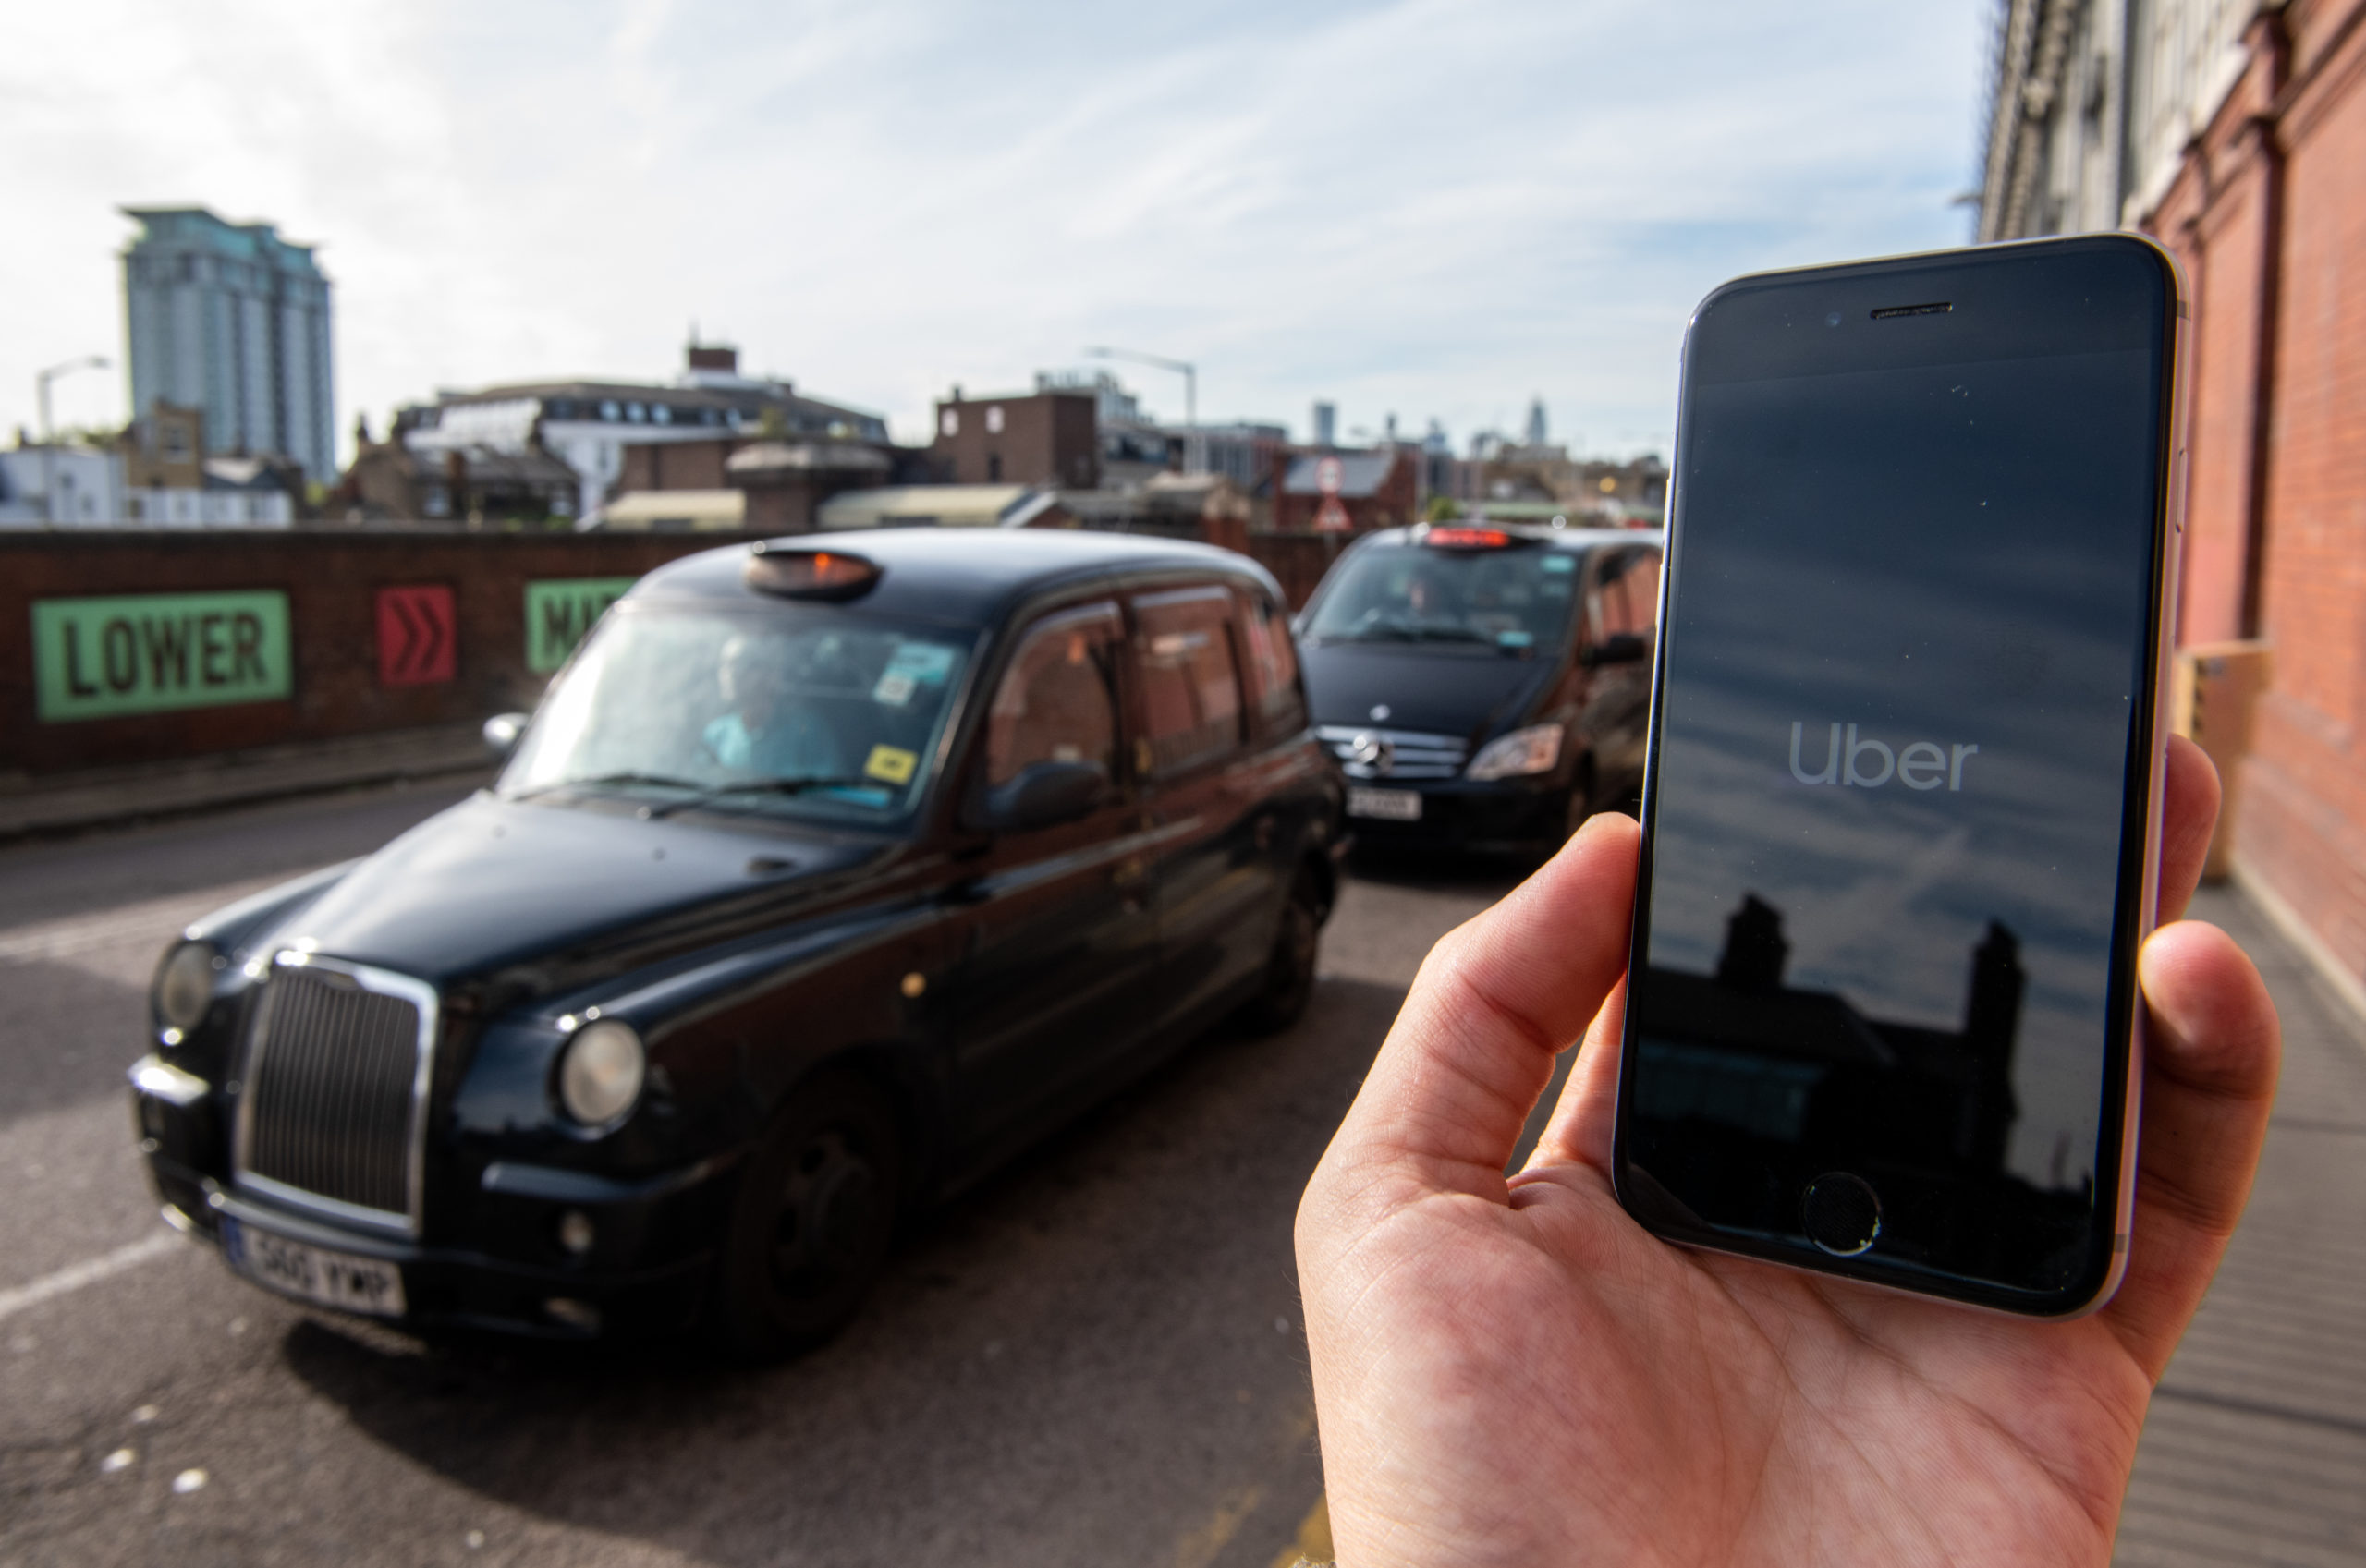 In this photo illustration a phone is held displaying the Uber logo in its app in front of a taxi stand in London, England. (Chris J Ratcliffe/Getty Images)